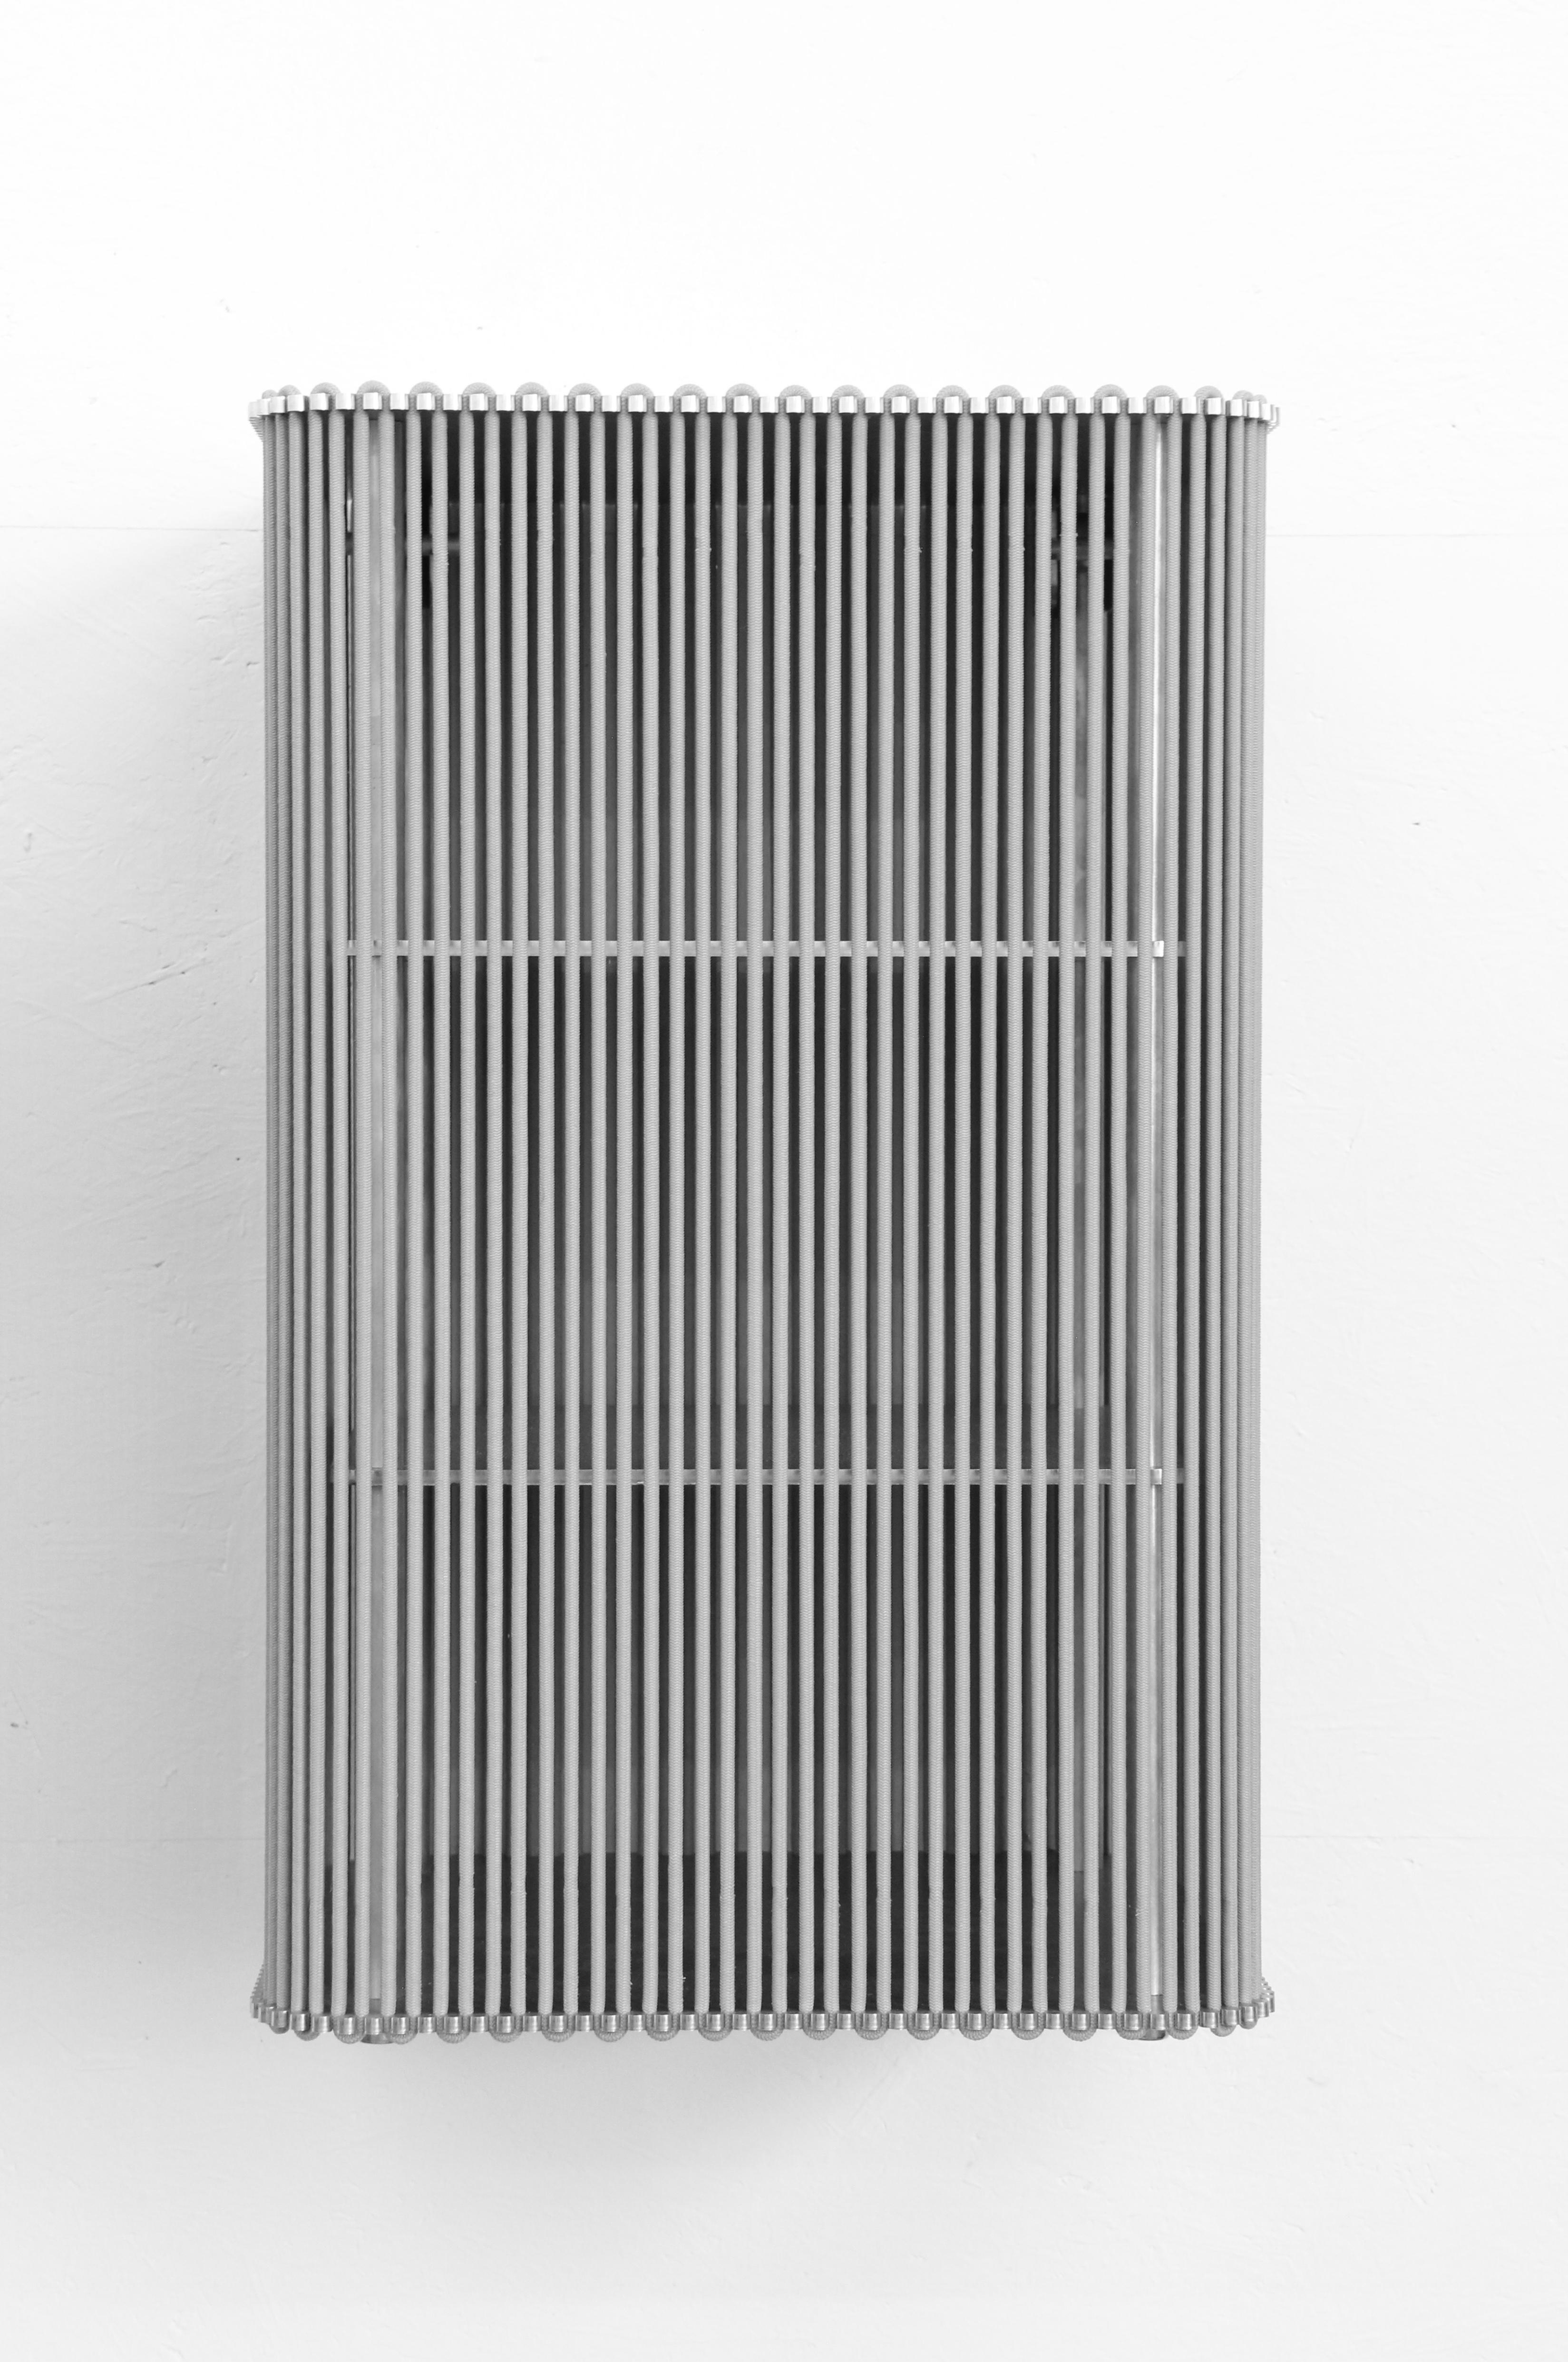 Coil square cabinet wall mounted/ side table by Bram Kerkhofs
Dimensions: D40 x W40 x H75.2cm
Materials: Stainless steel, aluminium, elastic rope (natural rubber, polyethylene).

Other dimensions are available.

COIL is a modular cabinet